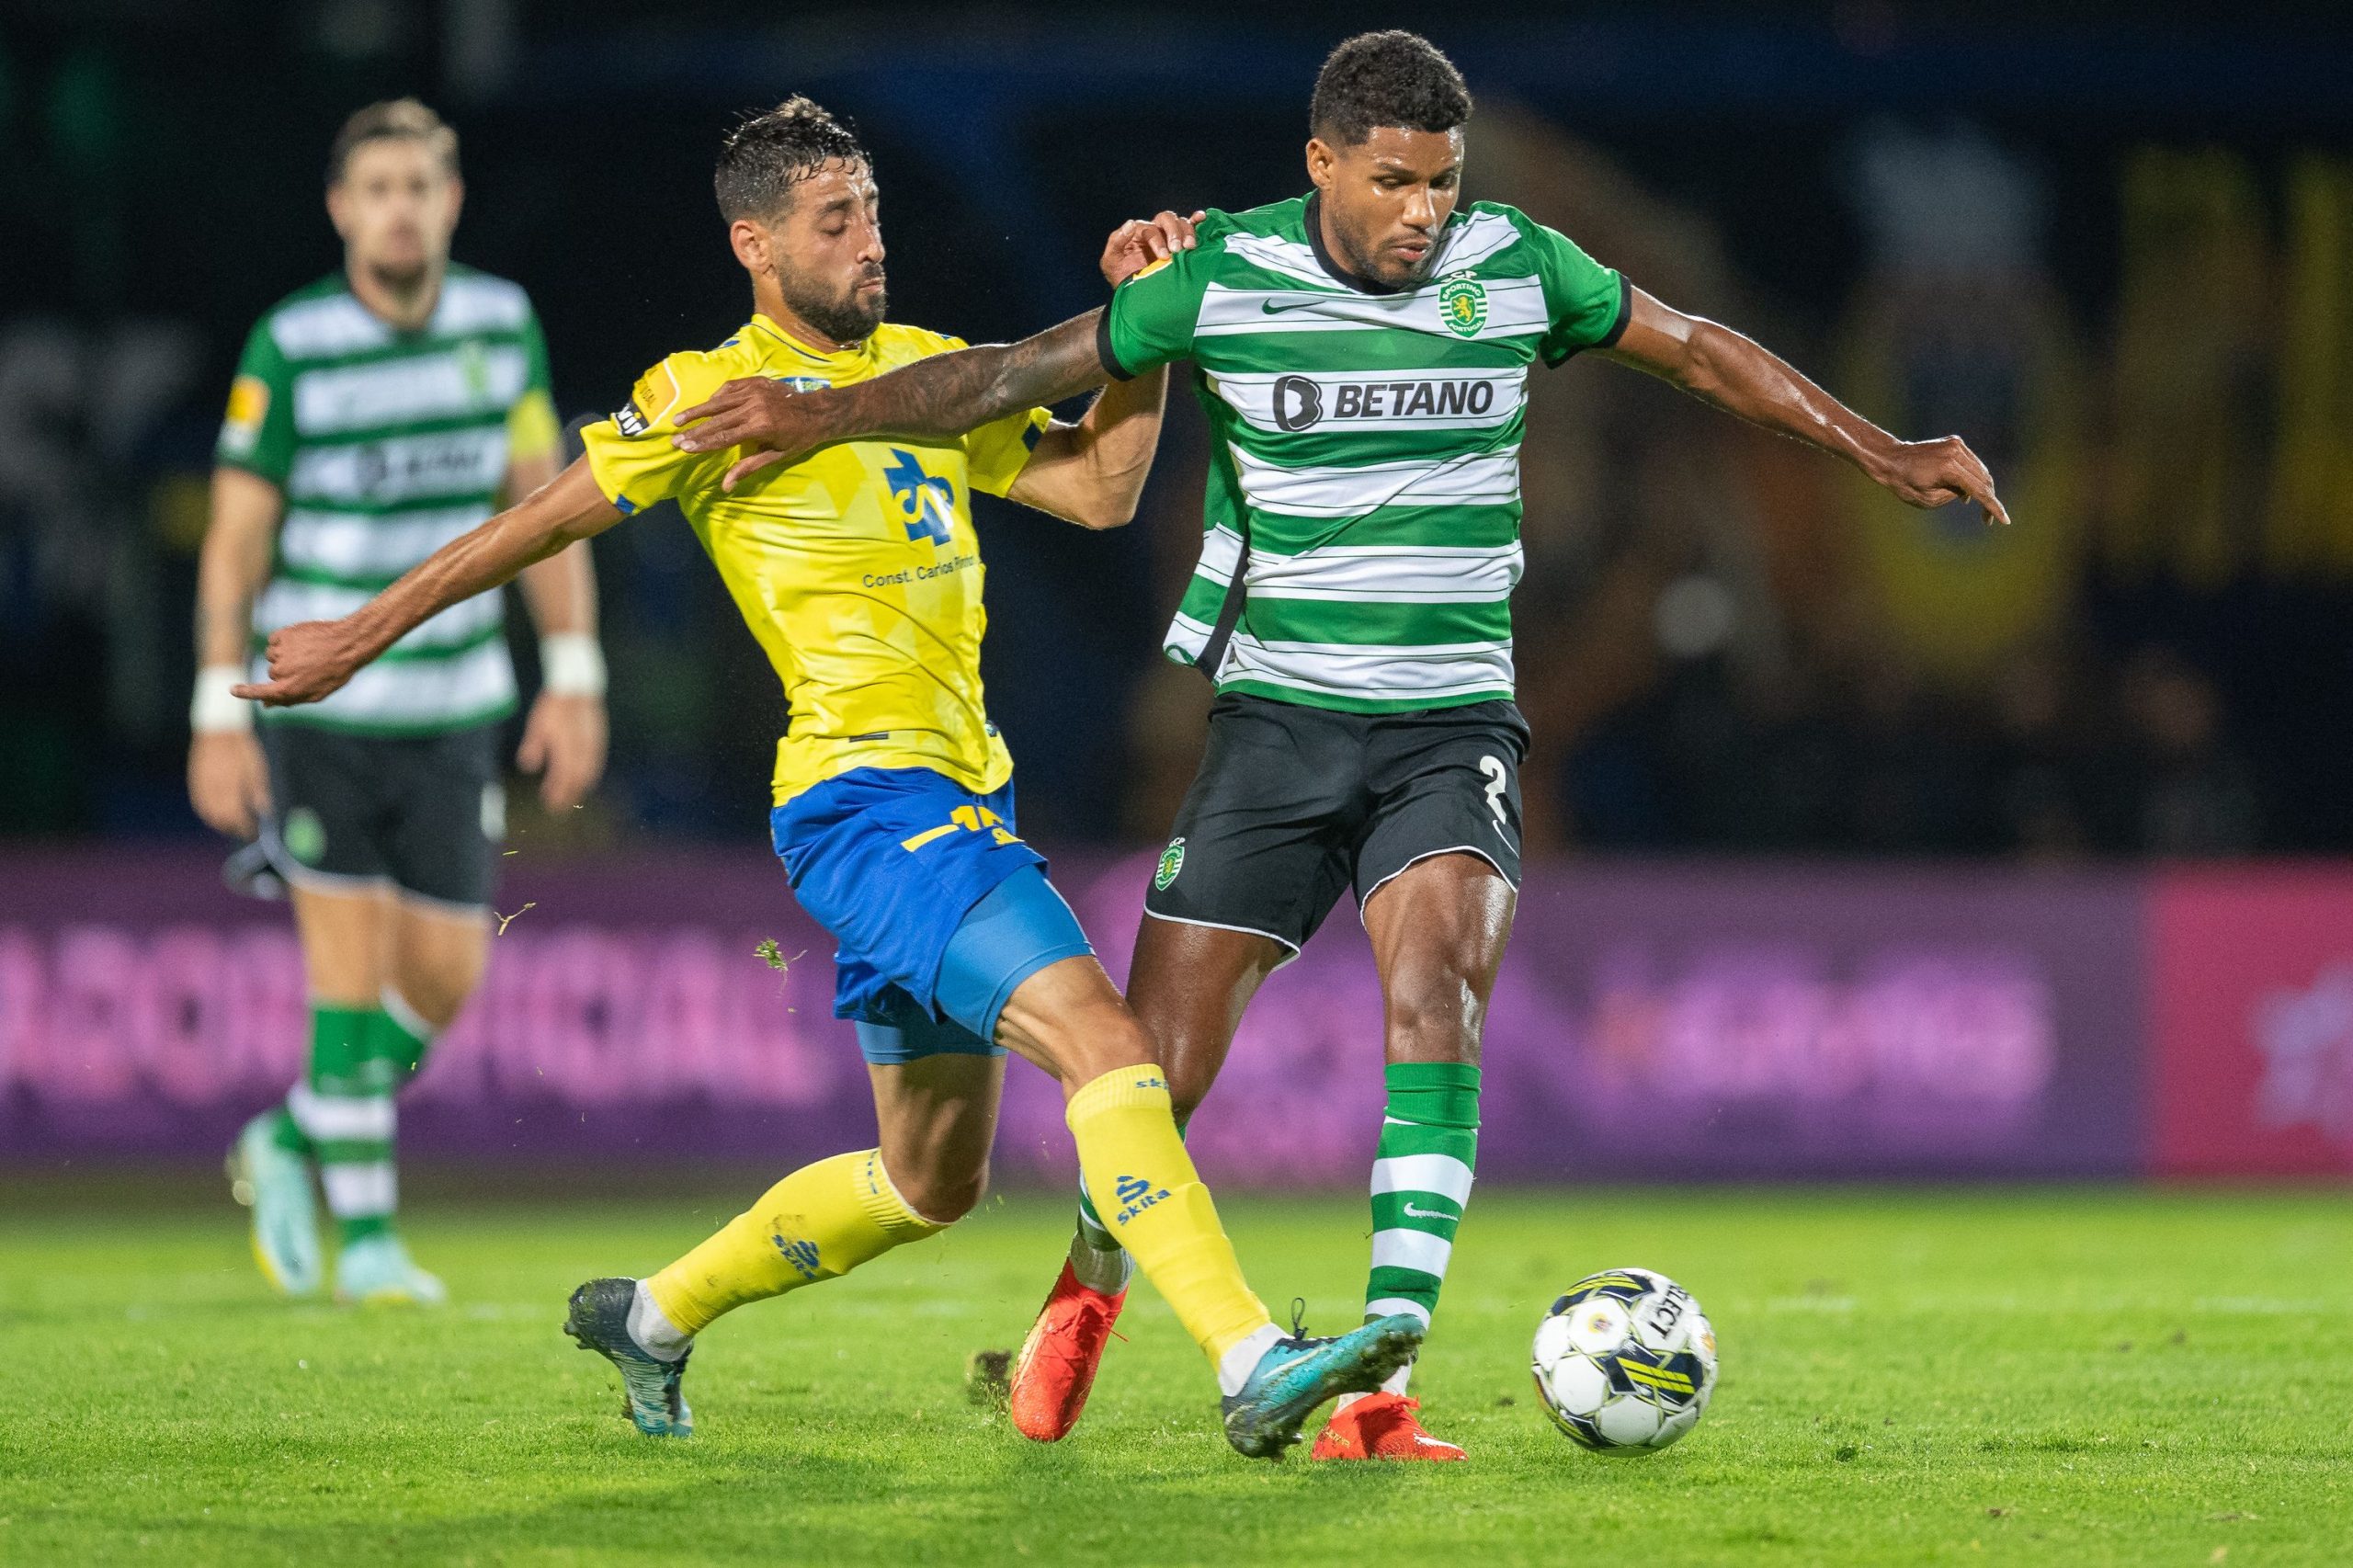 Aroucas Argentine midfielder Alan Ruiz(L) fights for the ball with Sporting Lisbon's Brazilian defender Matheus Reis during the Portuguese league football match between FC Arouca and Sporting CP at the Municipal stadium in Arouca on October 29, 2022.during the Portuguese league football match between FC Arouca and Sporting CP at the Municipal stadium in Arouca on October 29, 2022. (Photo by Rui Manuel FARINHA / AFP) (Photo by RUI MANUEL FARINHA/AFP via Getty Images)